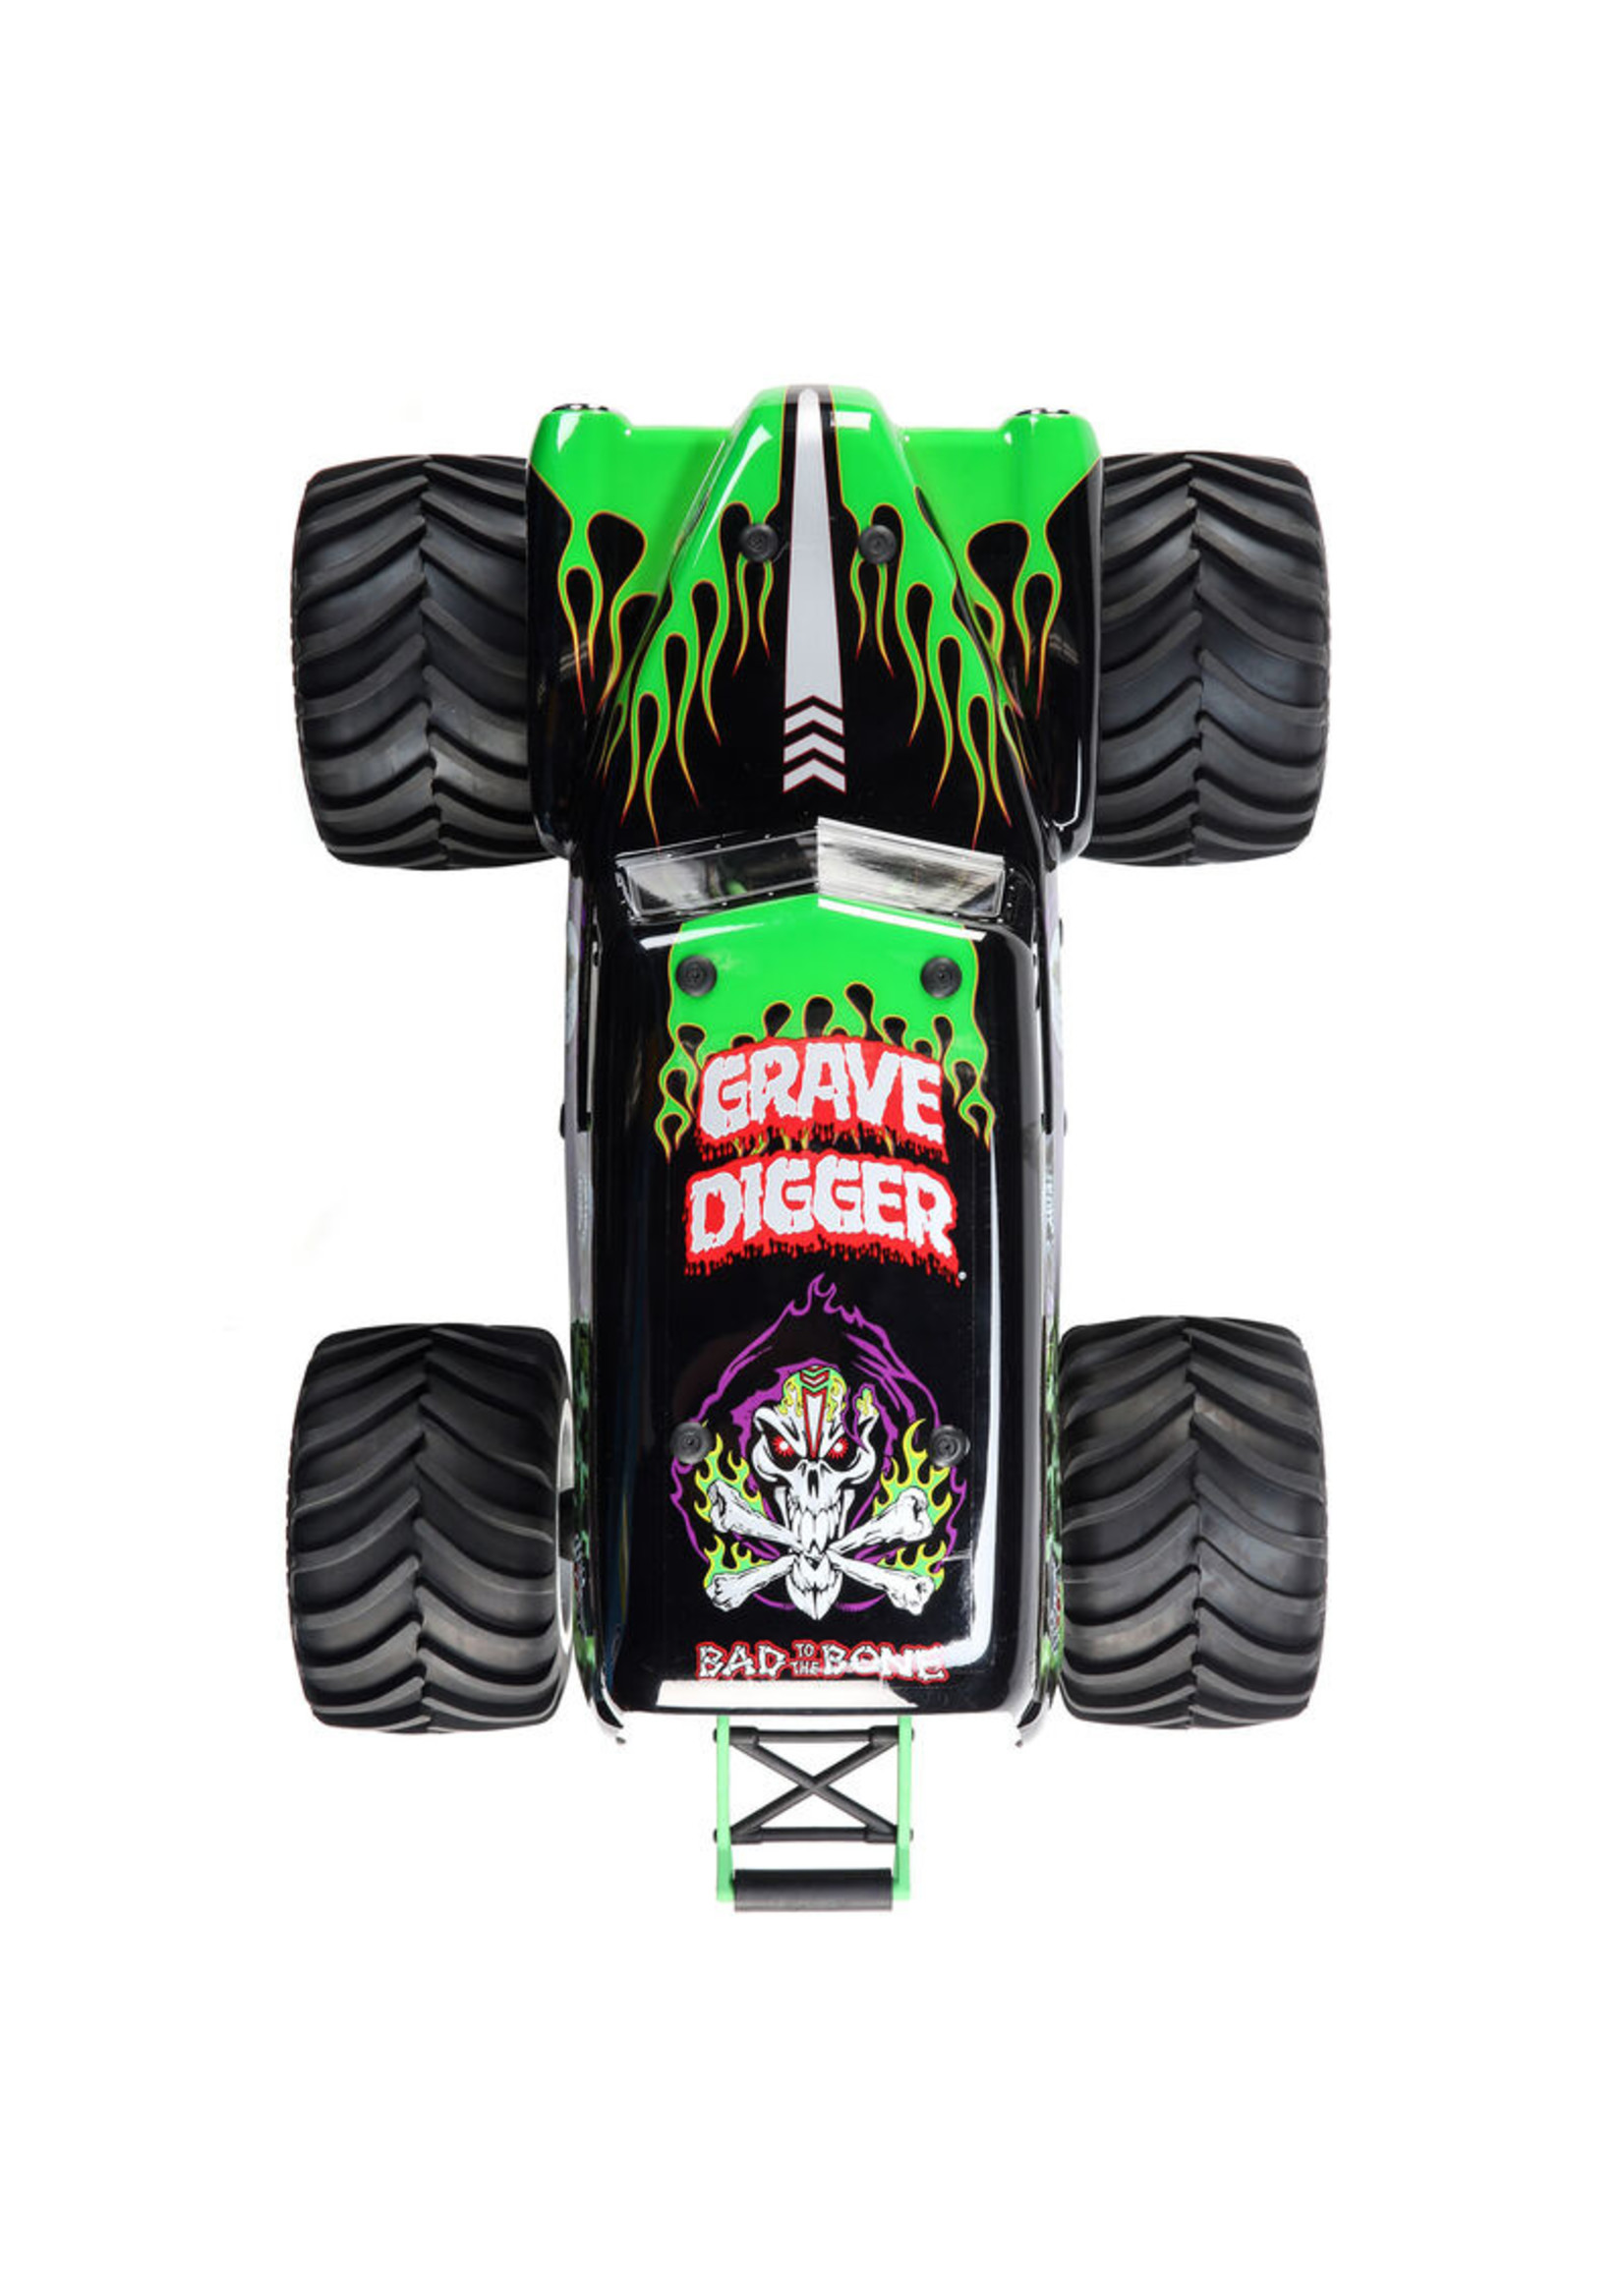 LMT 4X4 Solid Axle Monster Truck RTR, Grave DiggerGREEN